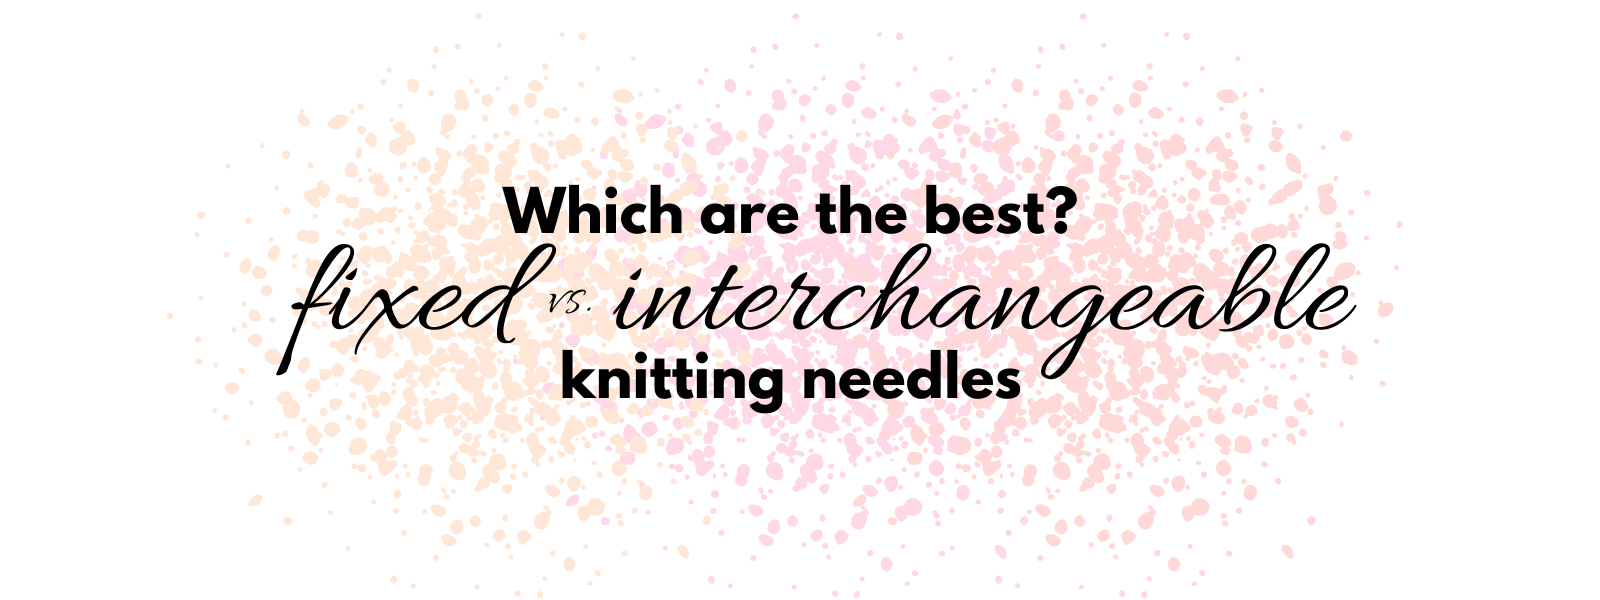 A comparison: Interchangeable vs. fixed knitting needles – which is right for you? There's some differences to take into consideration when deciding on knitting needles!